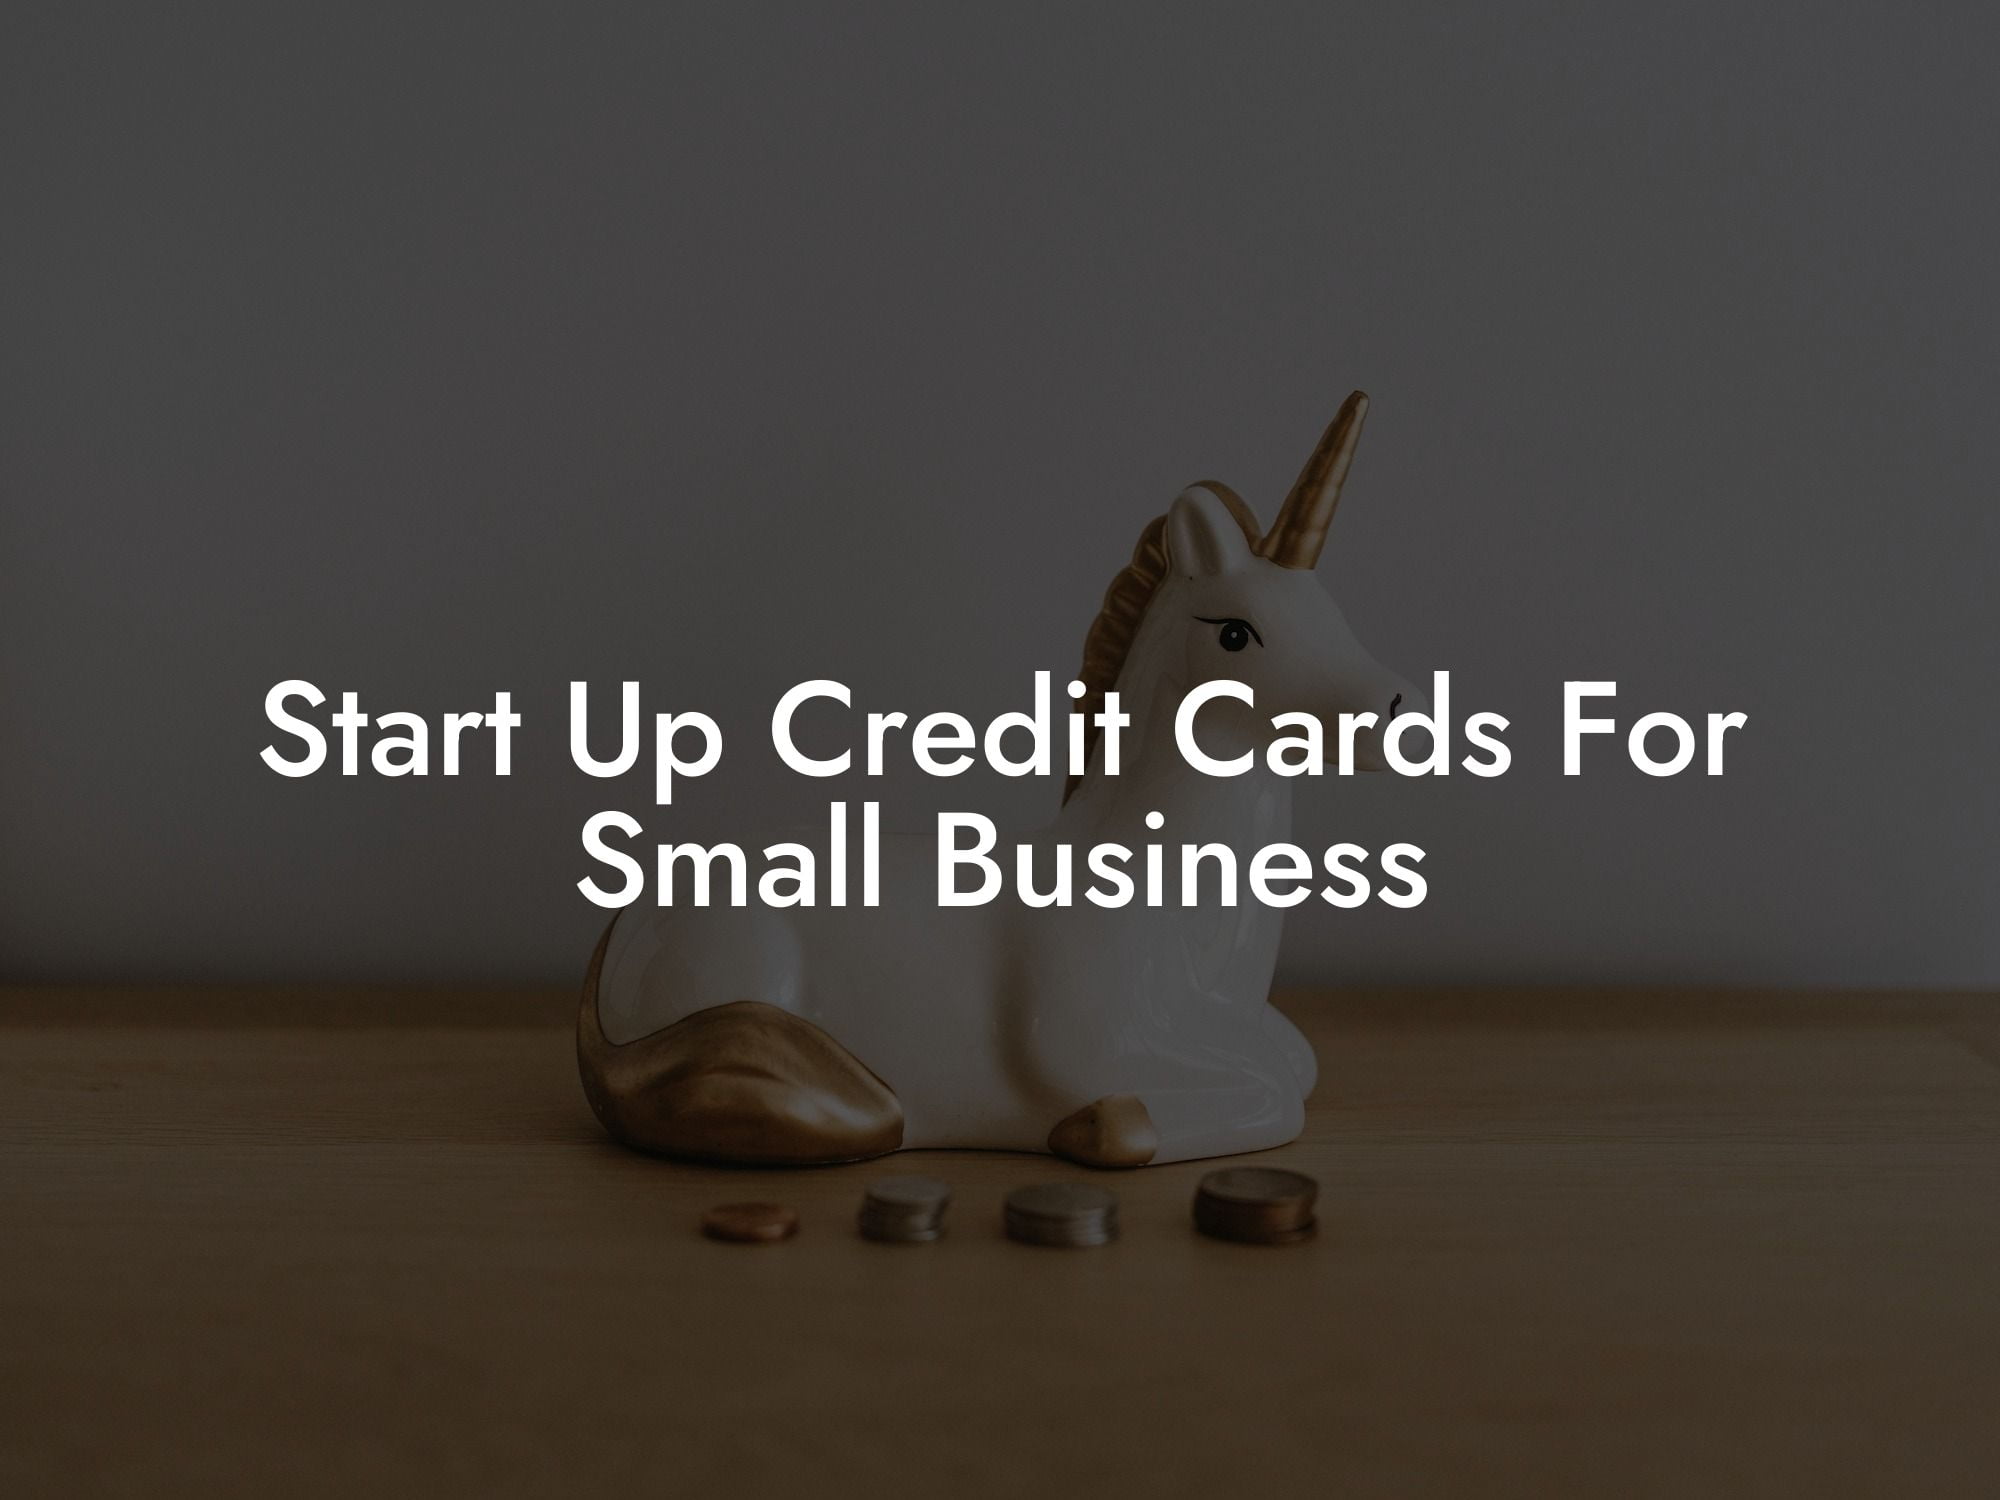 Start Up Credit Cards For Small Business